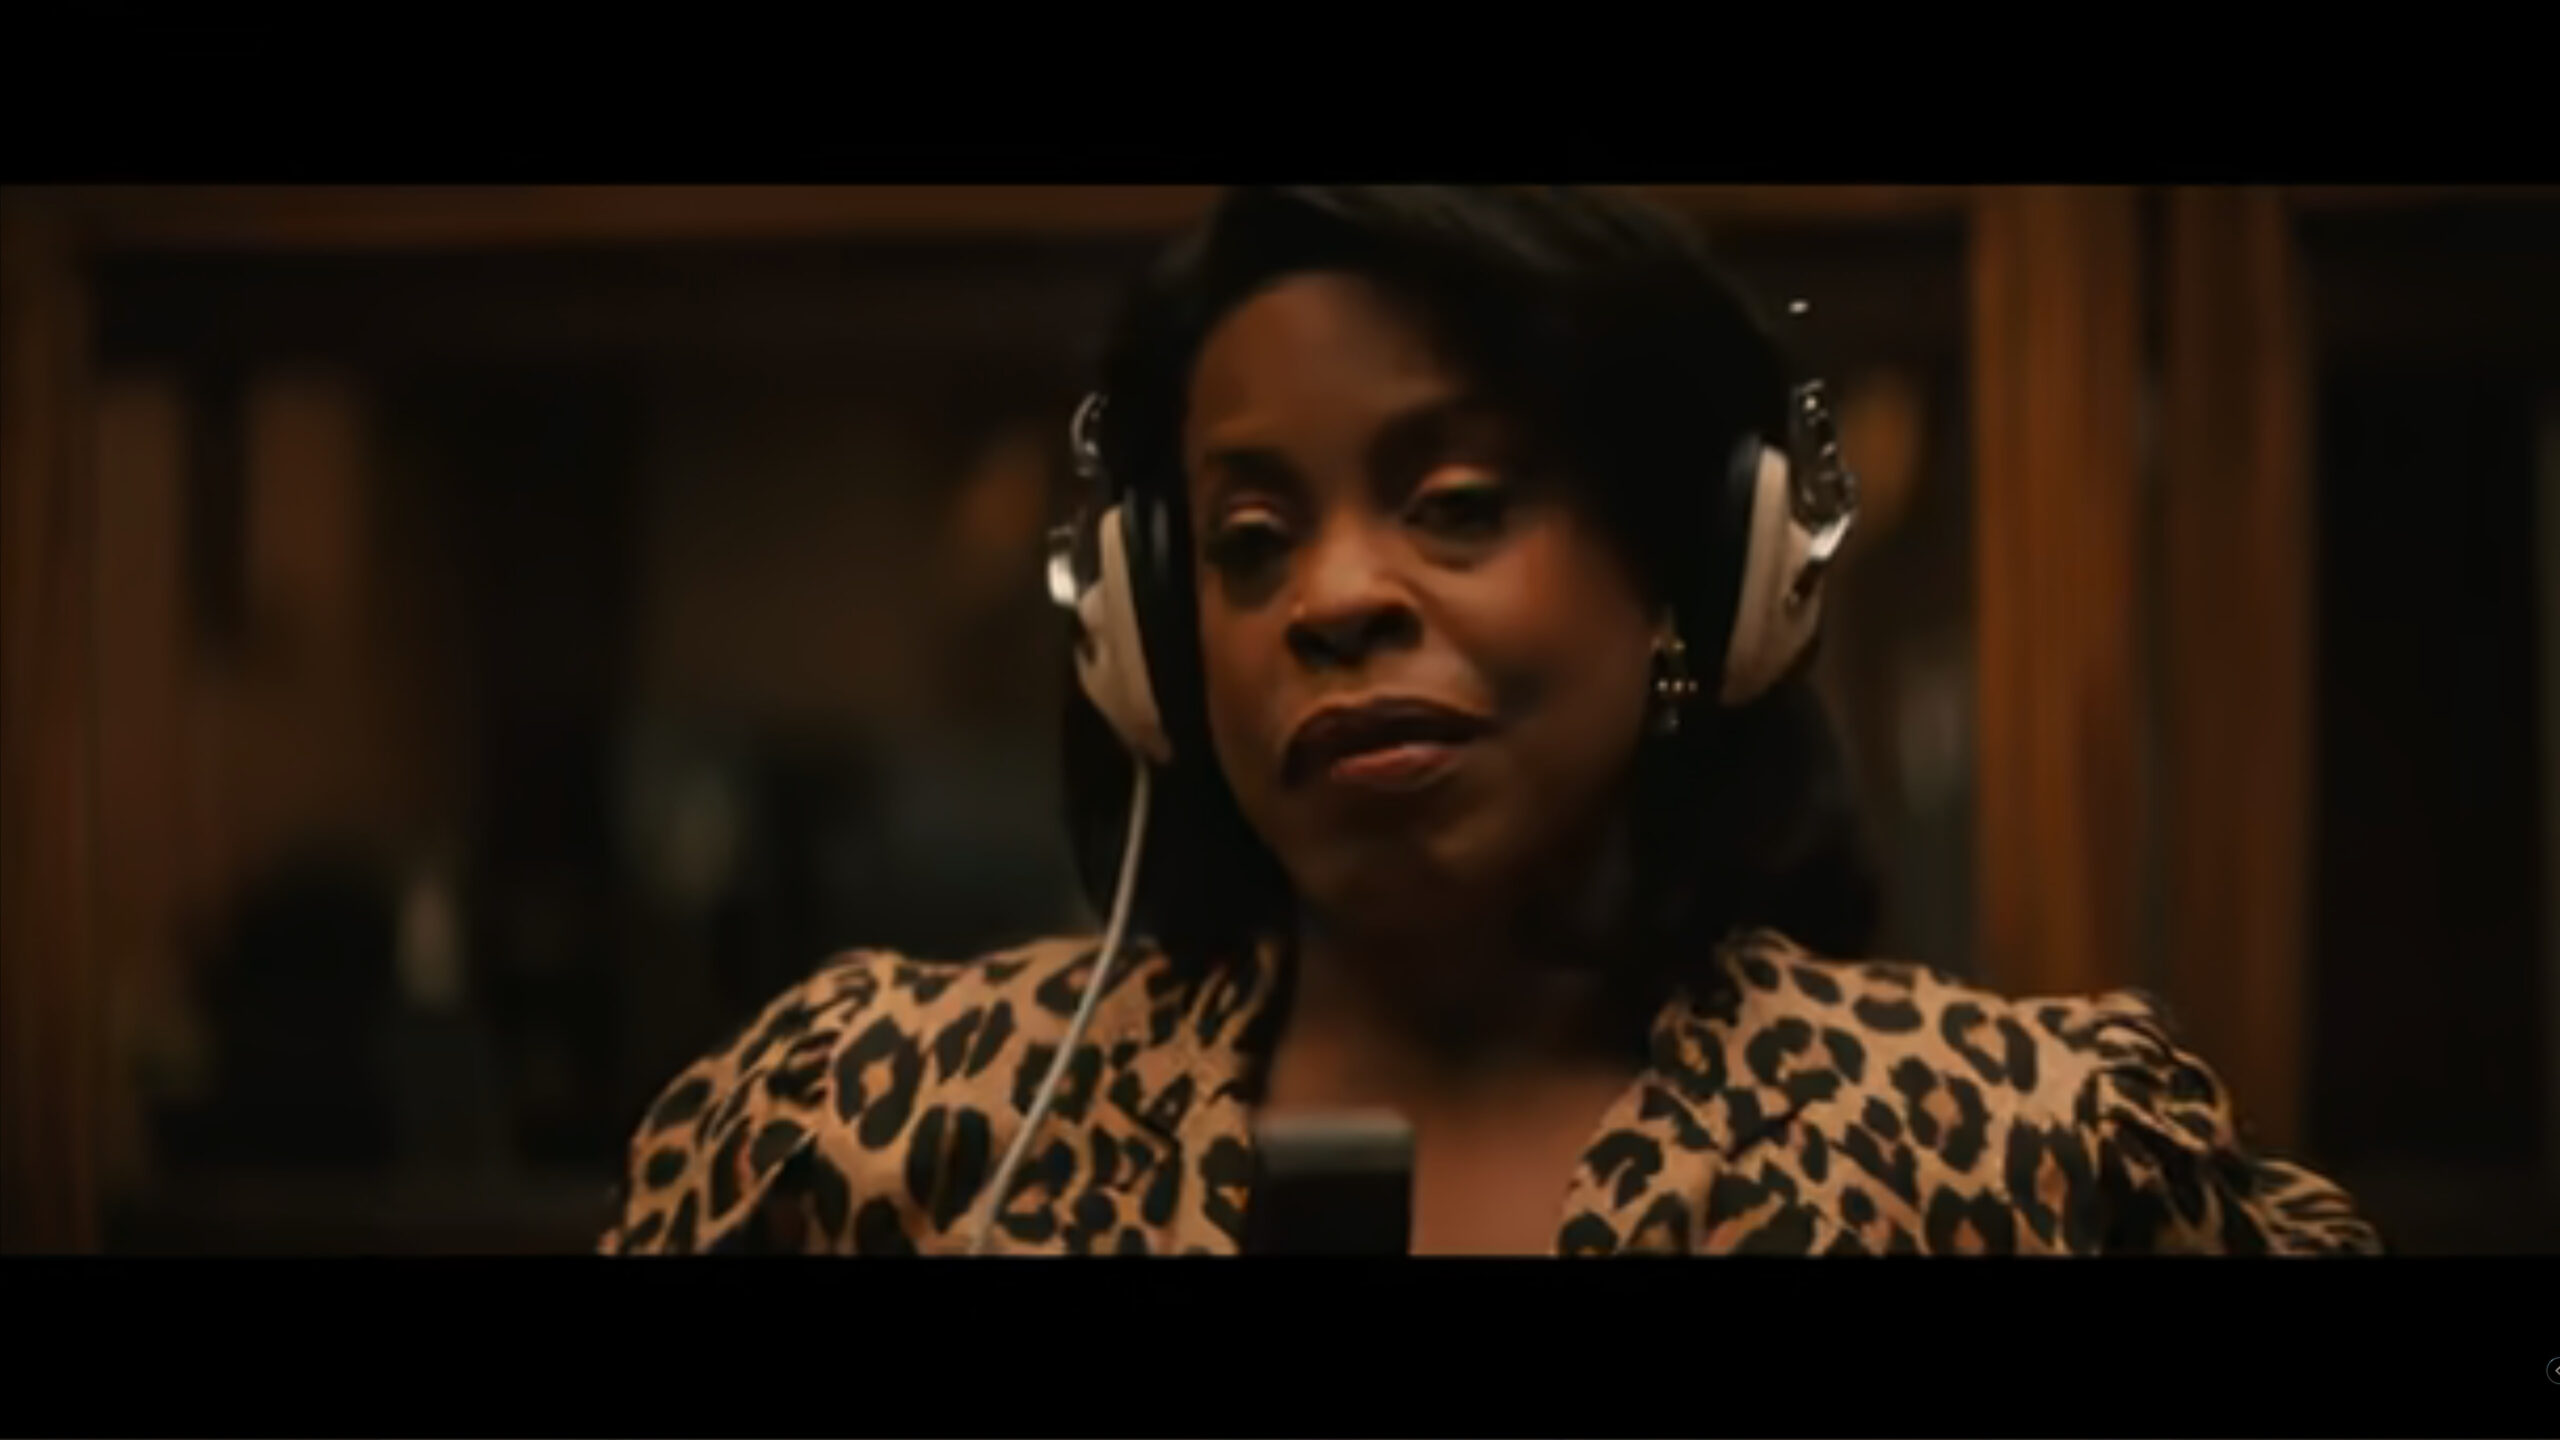 Beauty's Mom (Niecy Nash) in the booth, doing background vocals for Beauty